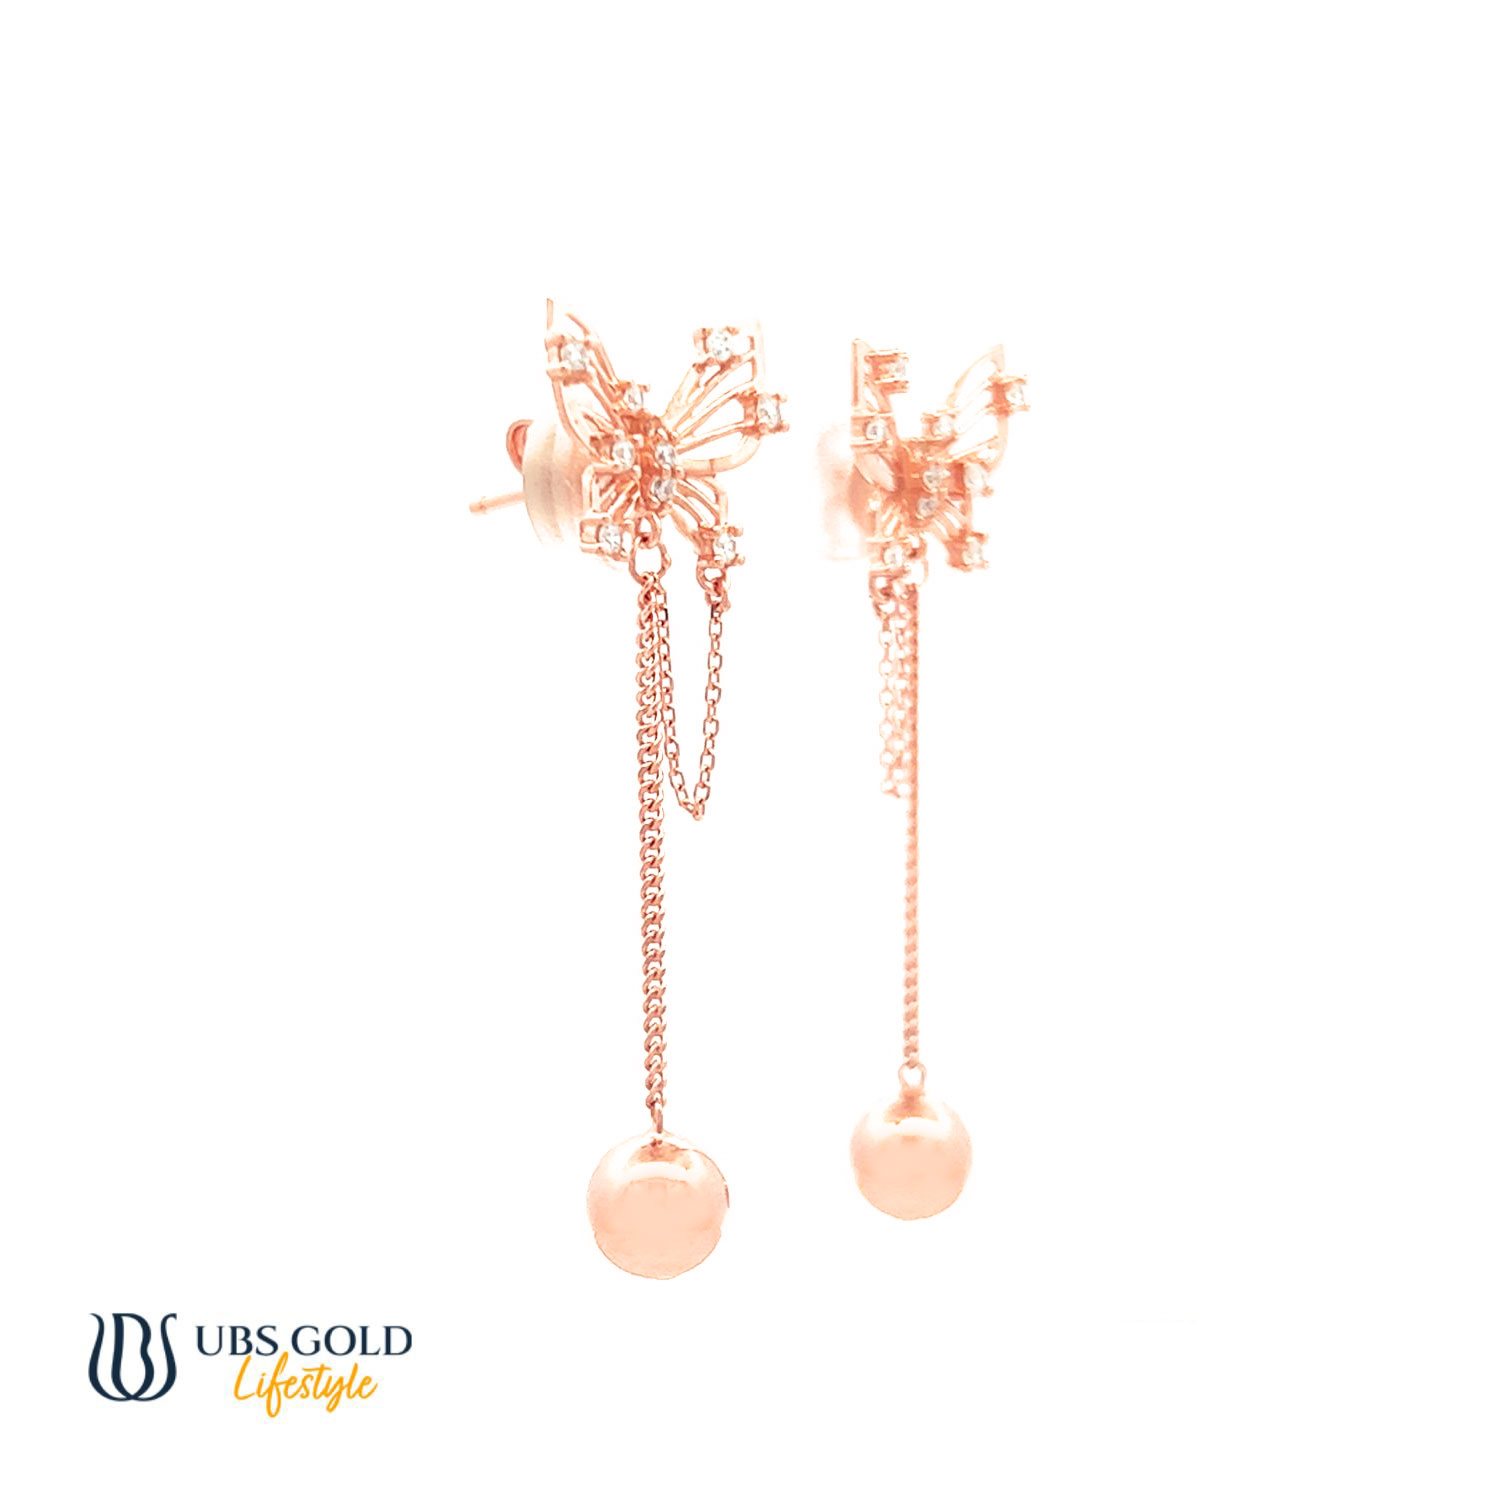 UBS Gold Anting Emas Millie Molly - Kwr1500 - 17K